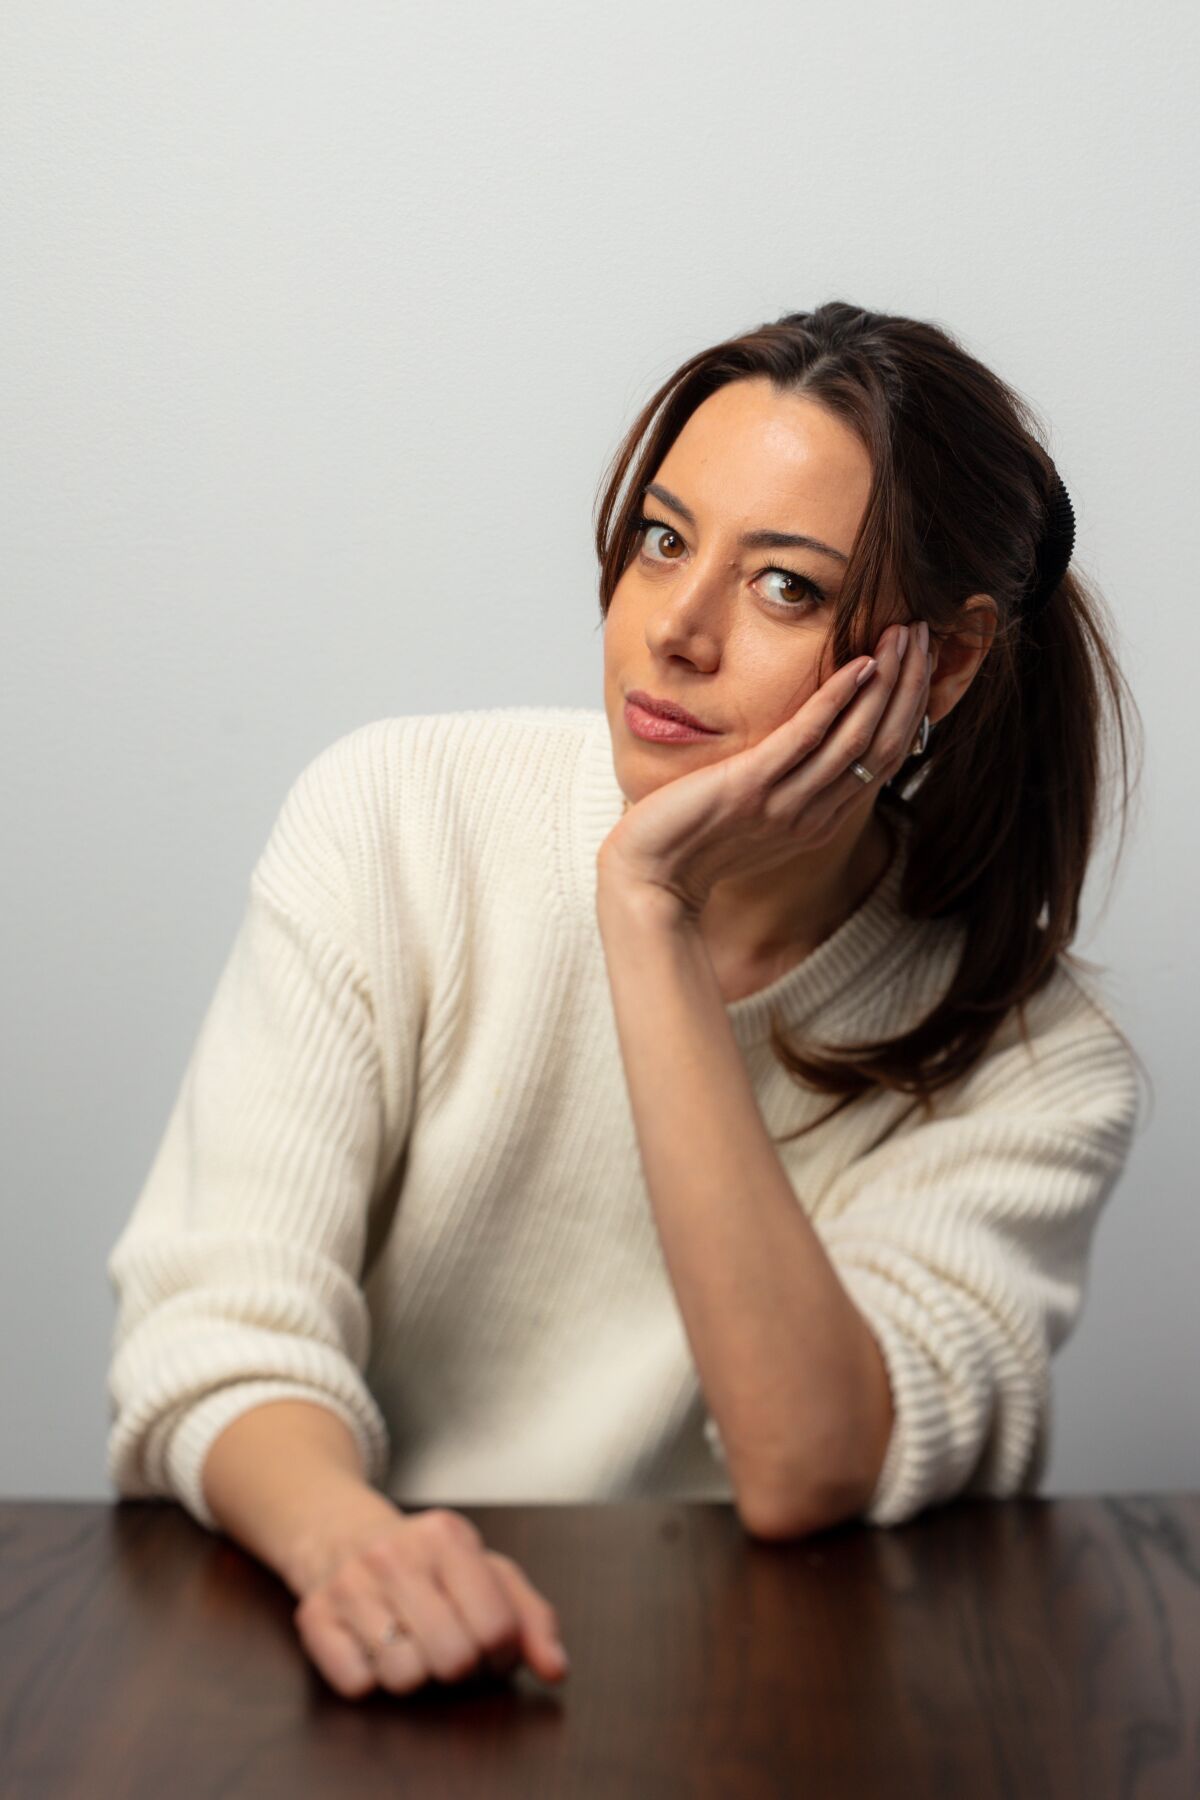 Actor and producer Aubrey Plaza of “Black Bear,” photographed at the Sundance Film Festival